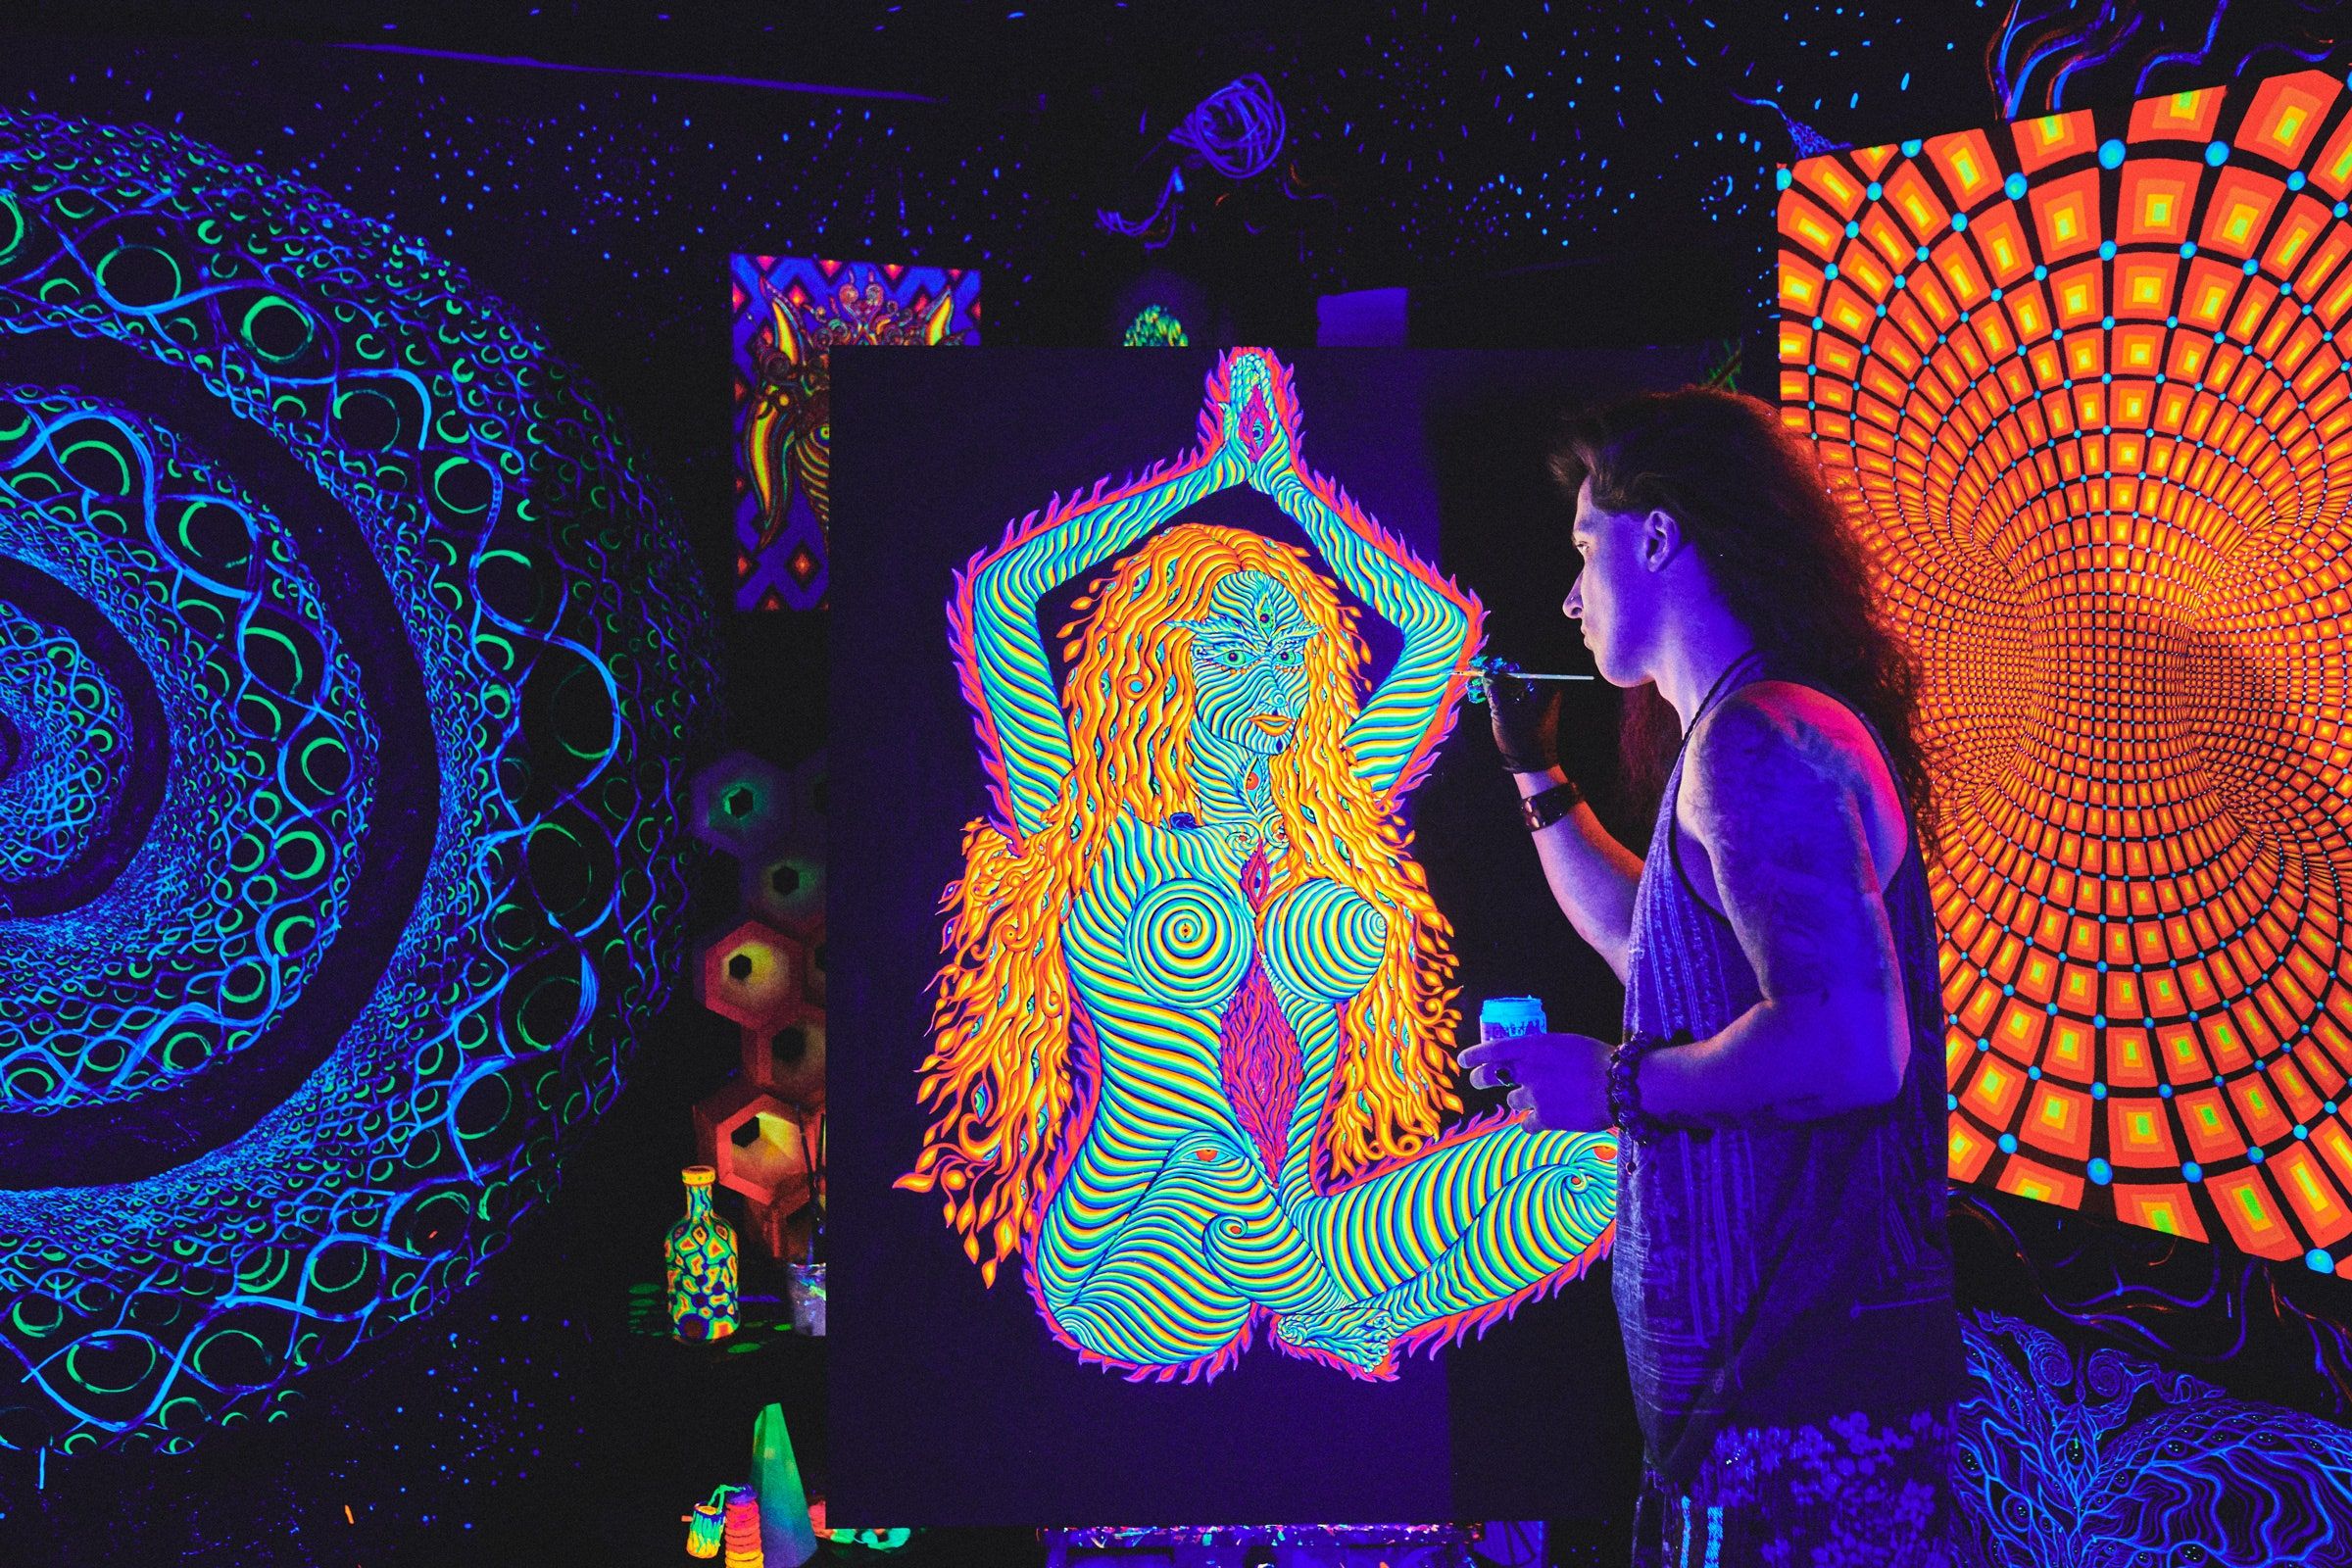 The Cosmic, Psychedelic, Glow In The Dark Art Of Alex Aliume | Wired Pertaining To Cosmic Sound Wall Art (View 13 of 15)